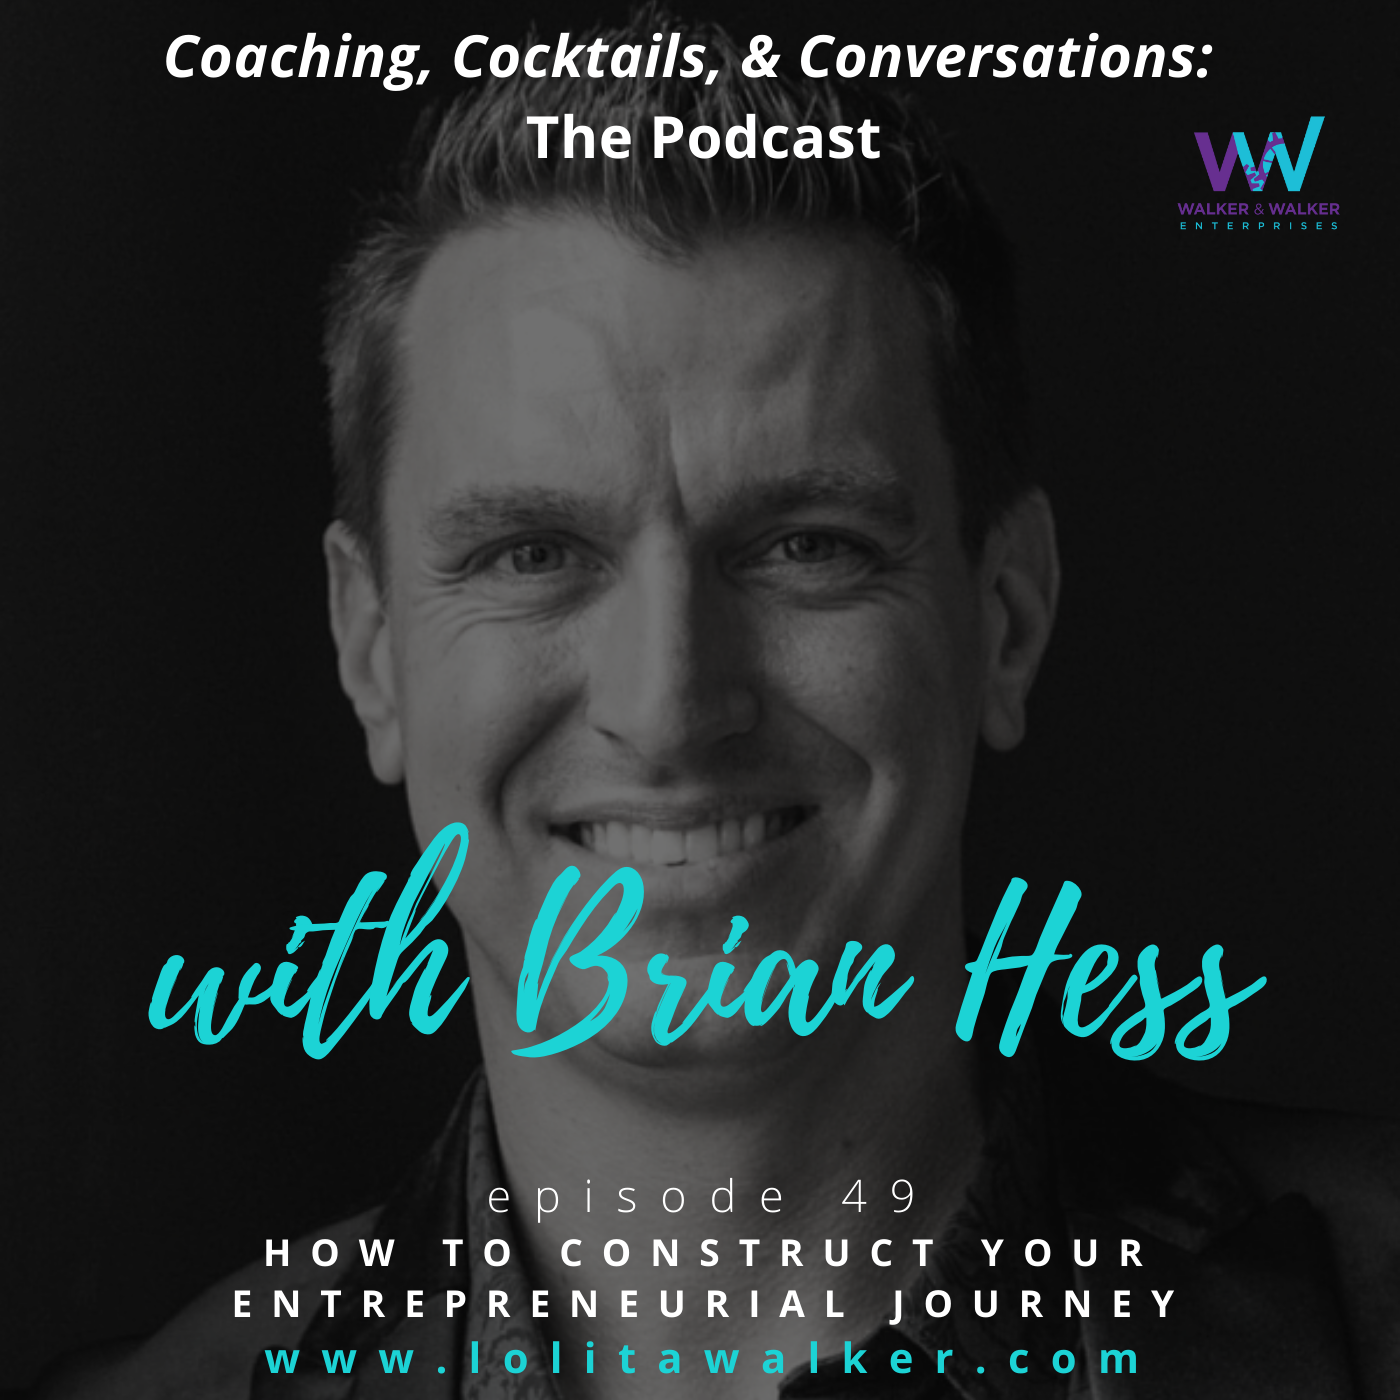 S3E49 - How to Construct Your Entrepreneurial Journey (with Brian Hess)